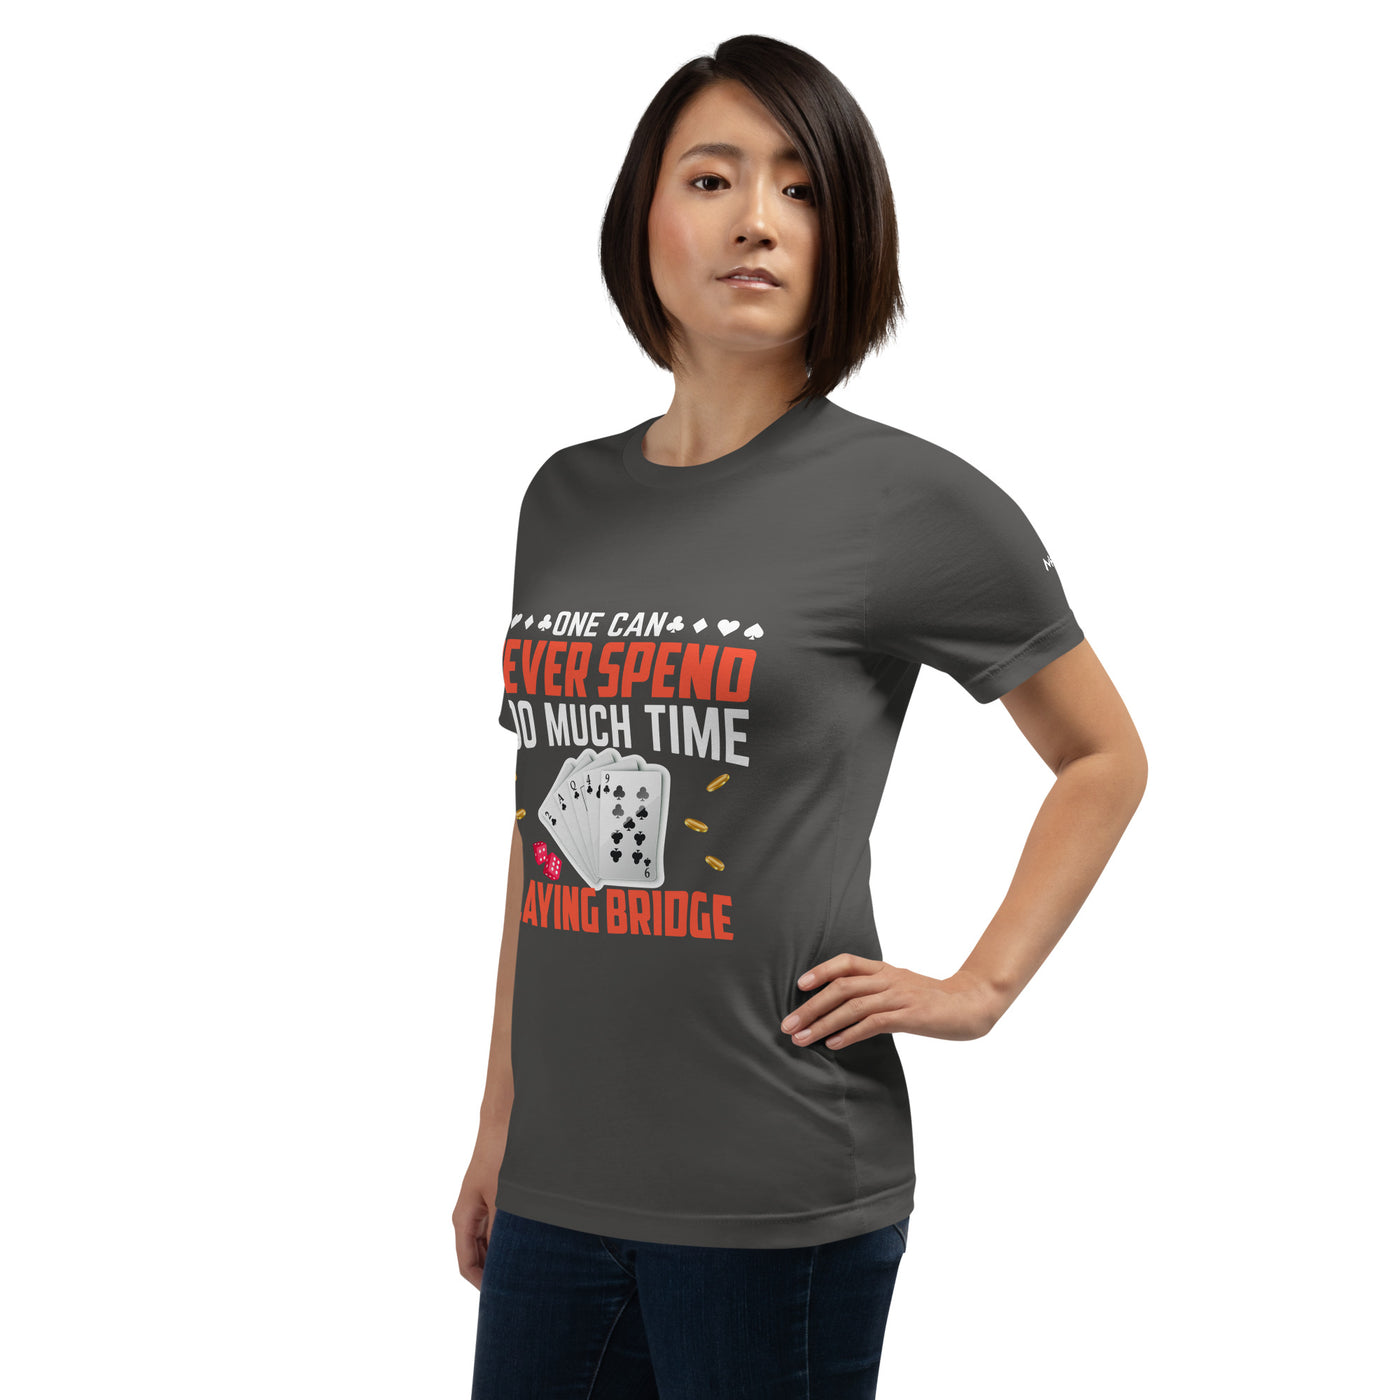 One can never Spend too much Time playing Bridge - Unisex t-shirt